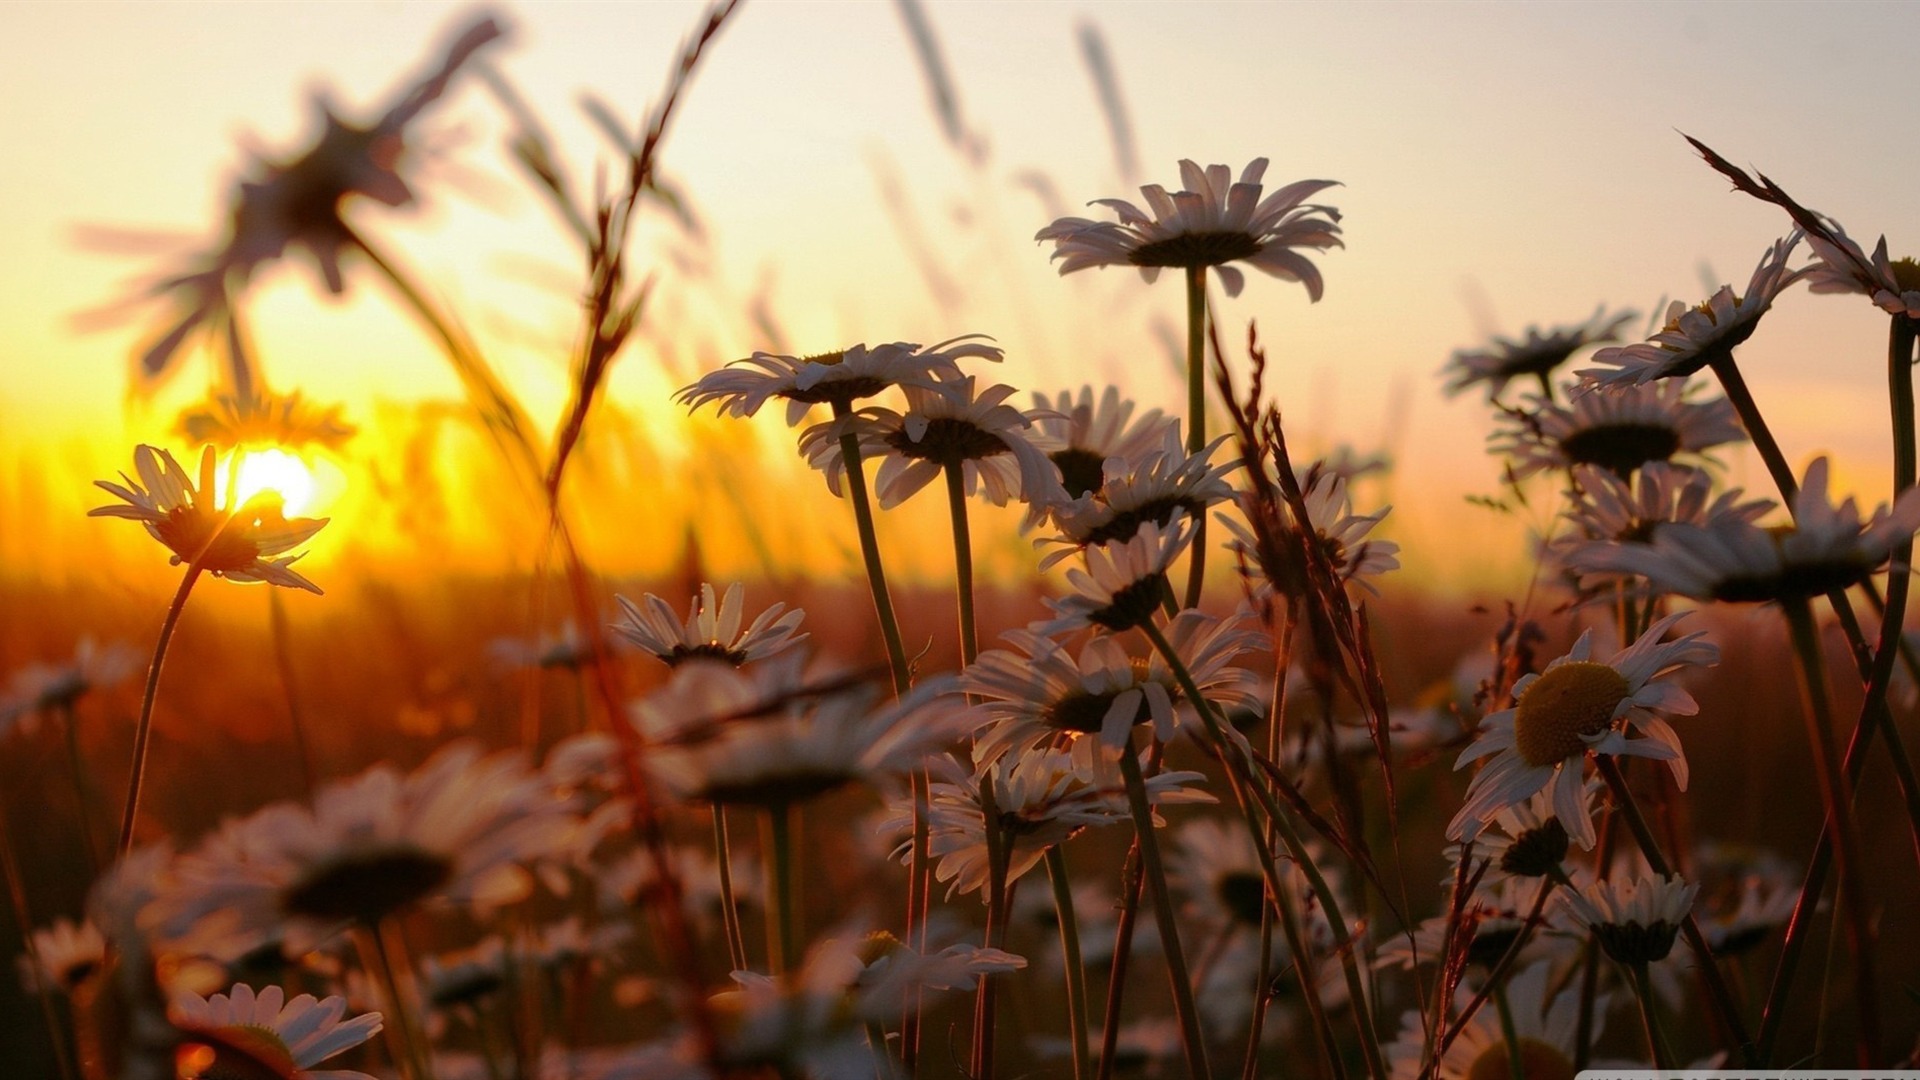 Daisies At Sunset Colorful Flowers Wallpaper Photo